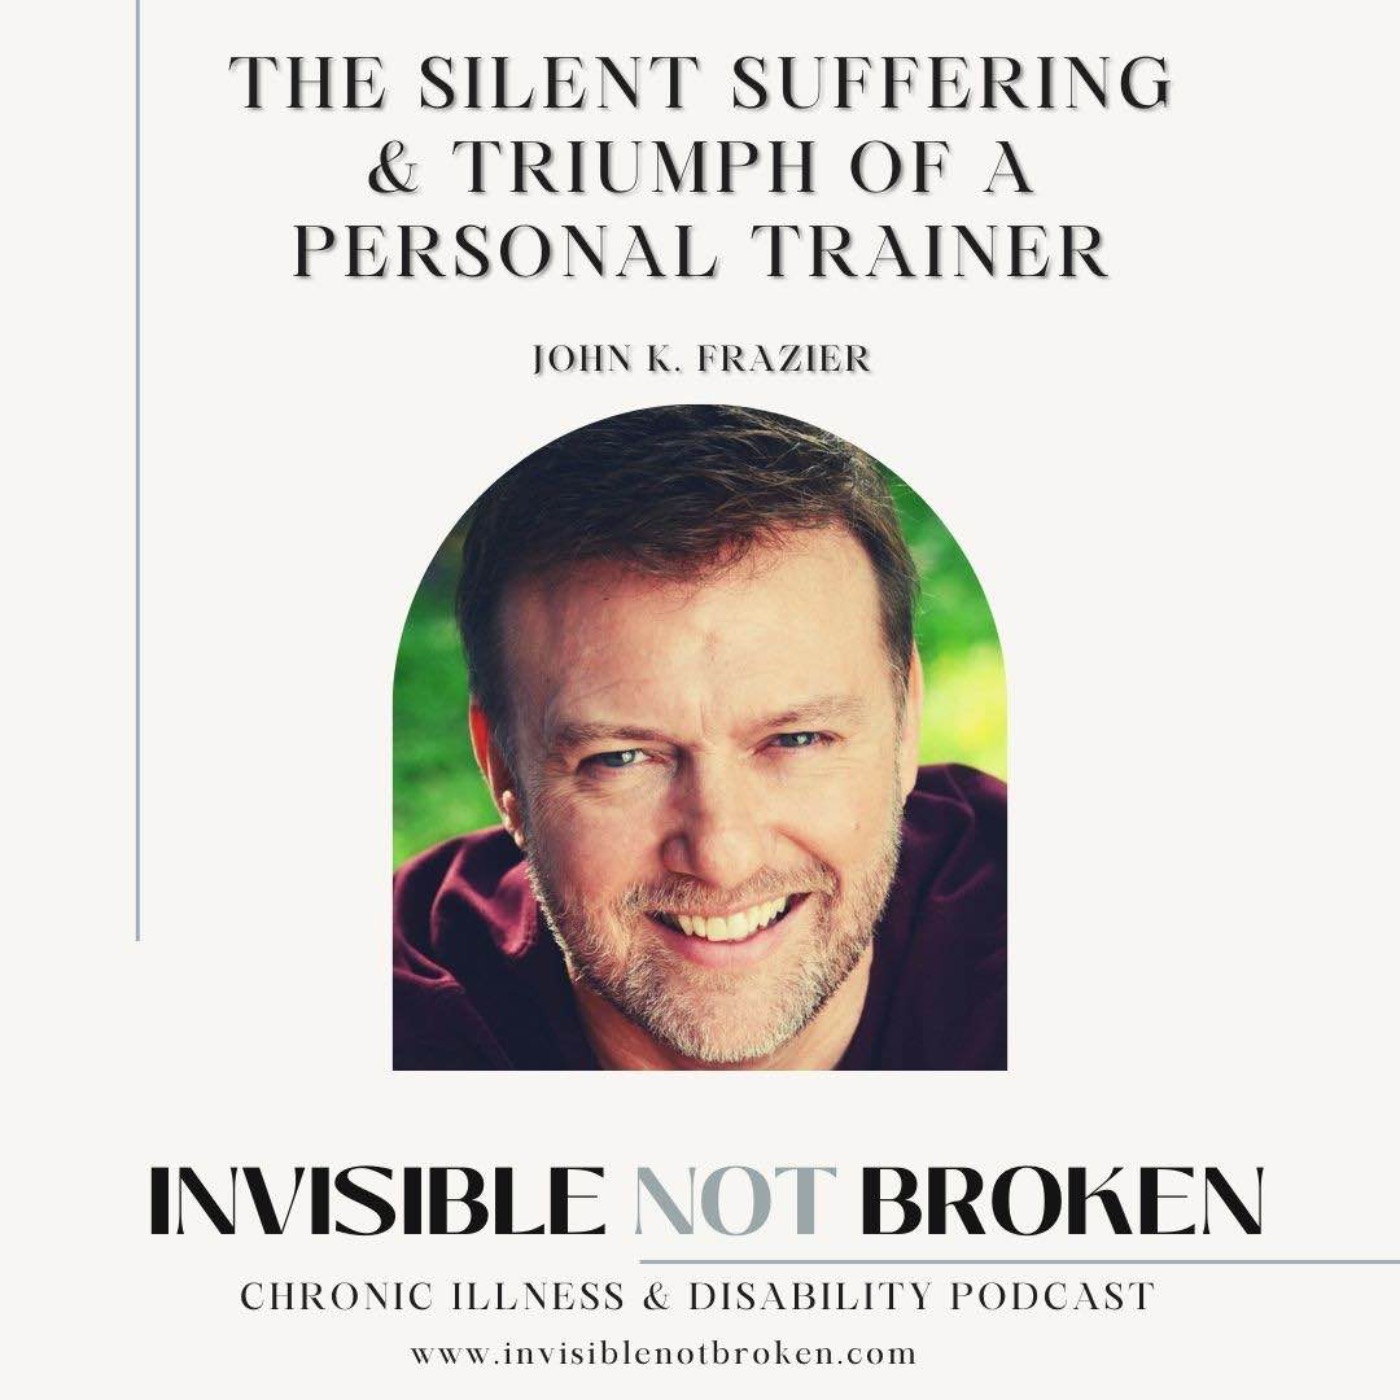 Author of “Through the Pain: The Silent Suffering & Triumph of a Personal Trainer”: John K. Frazier